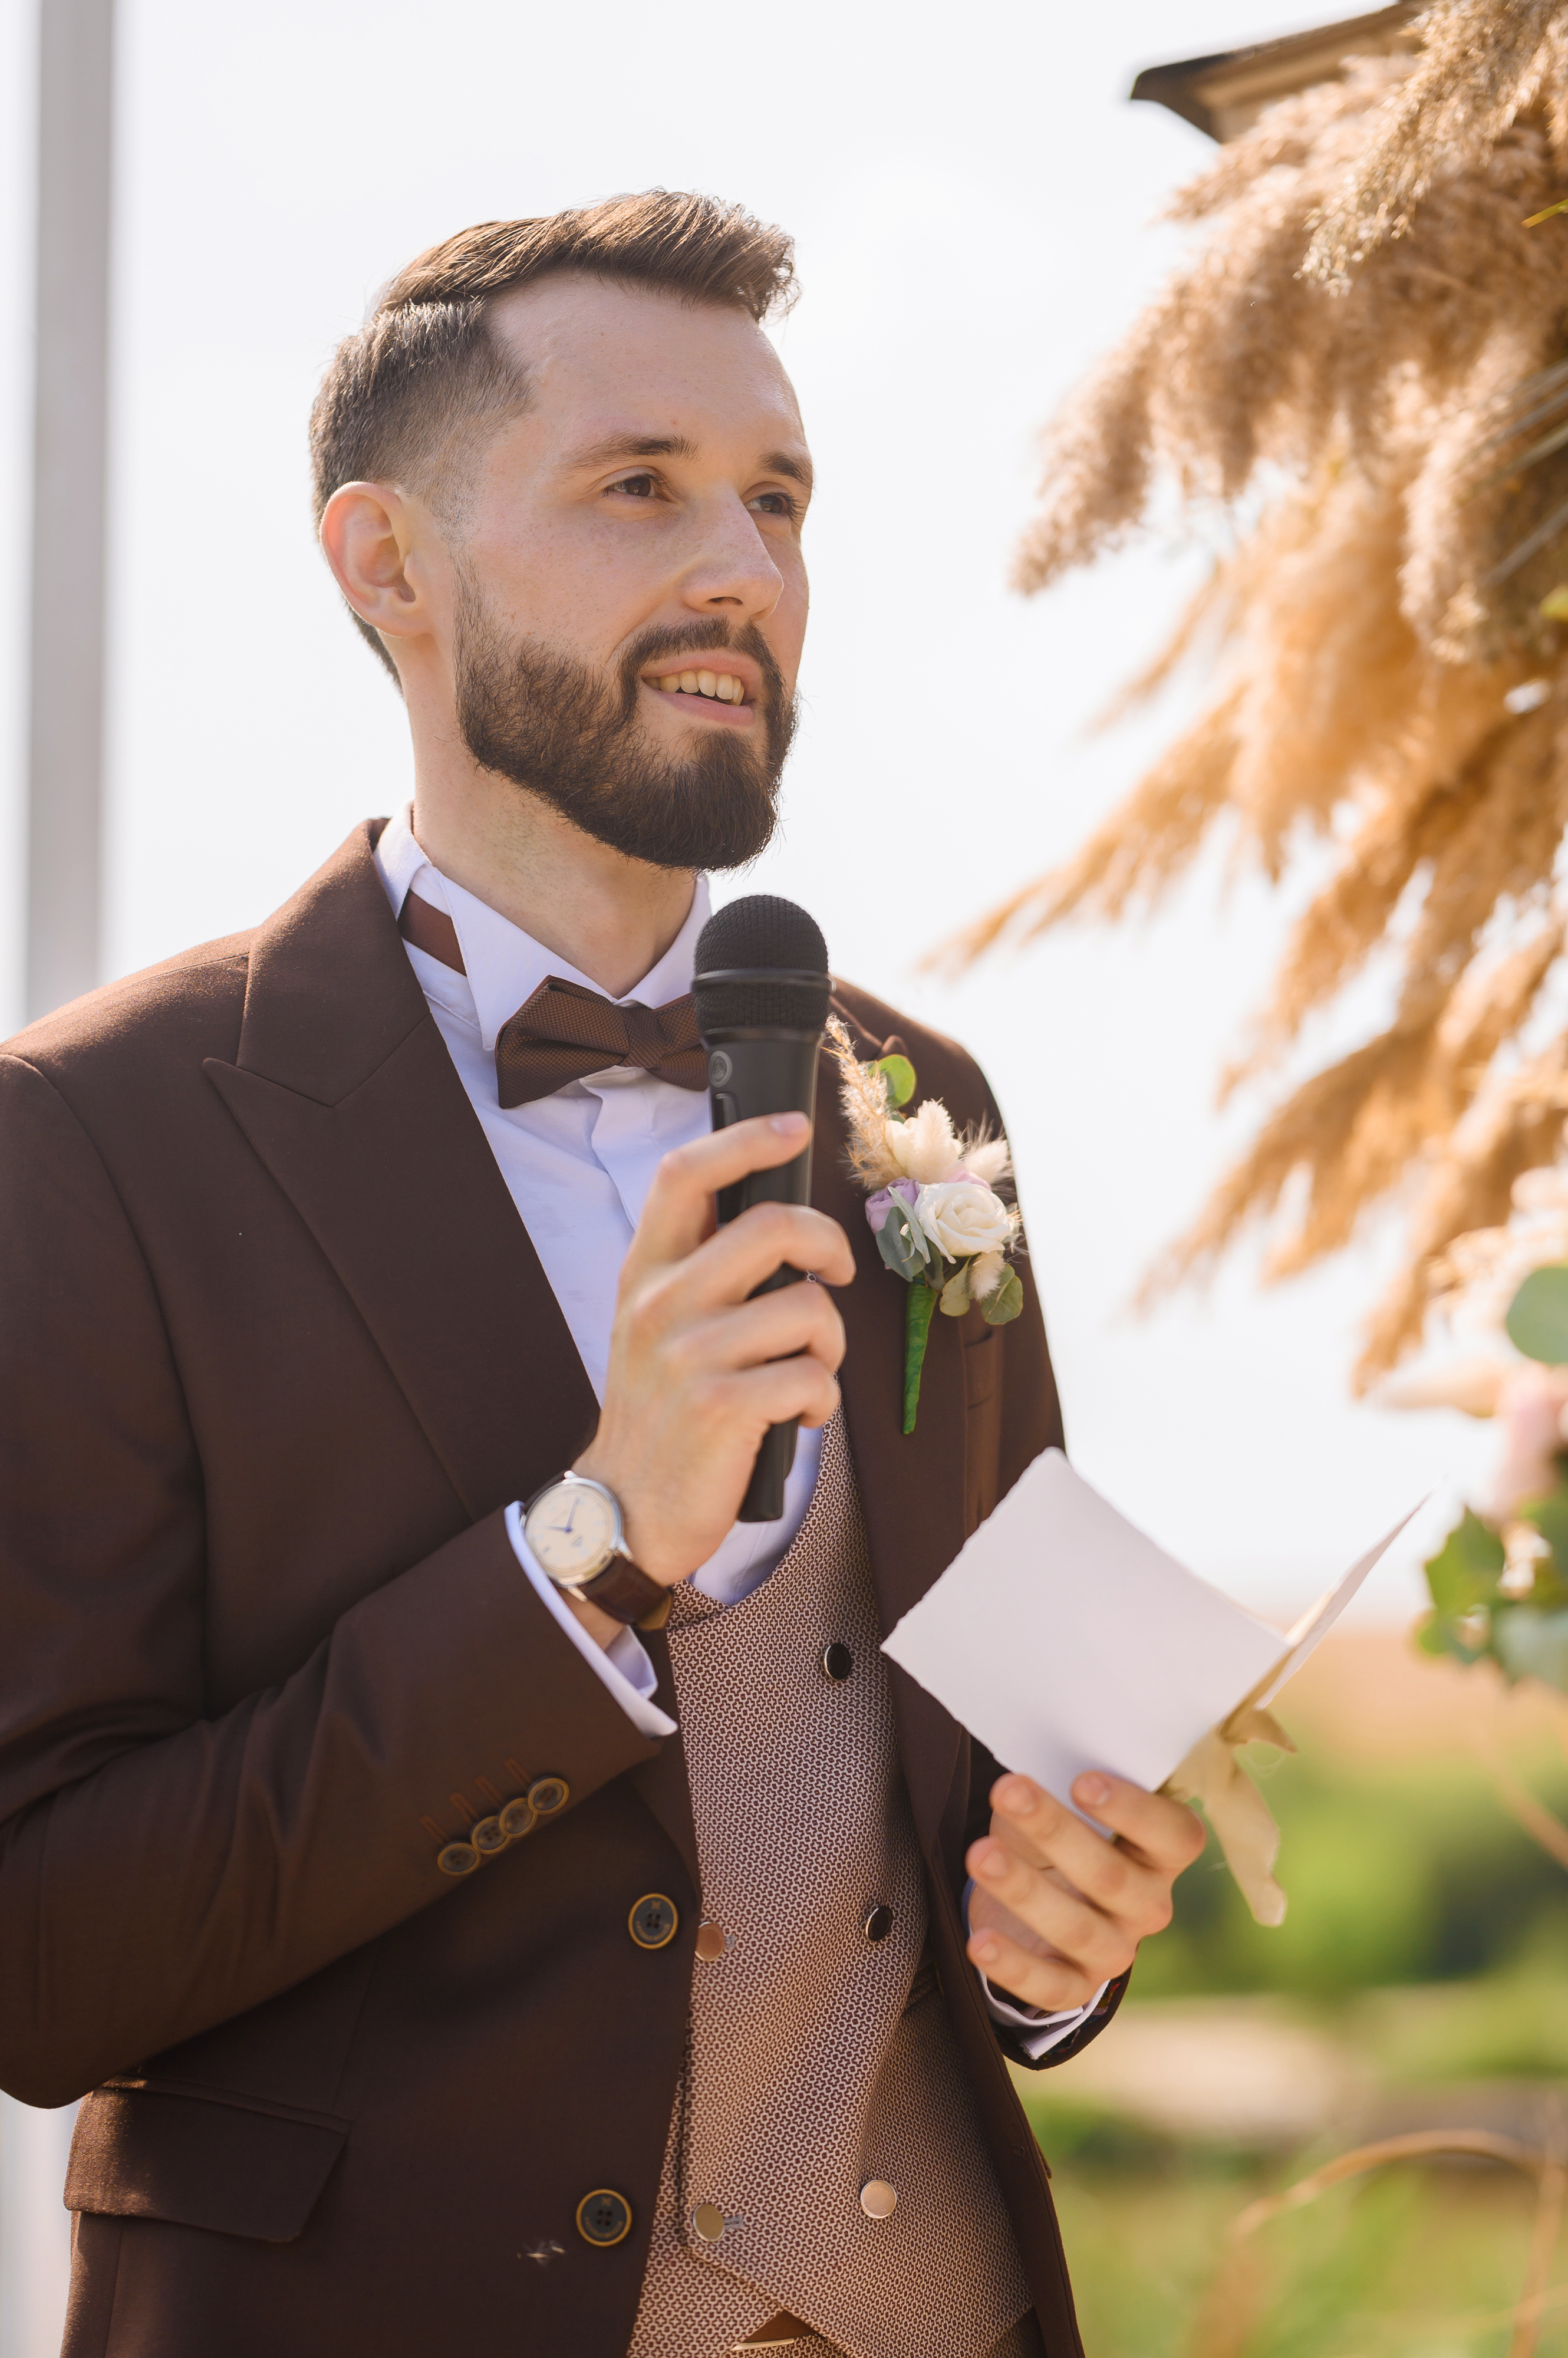 For illustration purposes only. A man giving a speech at his brother's wedding | Source: Freepik